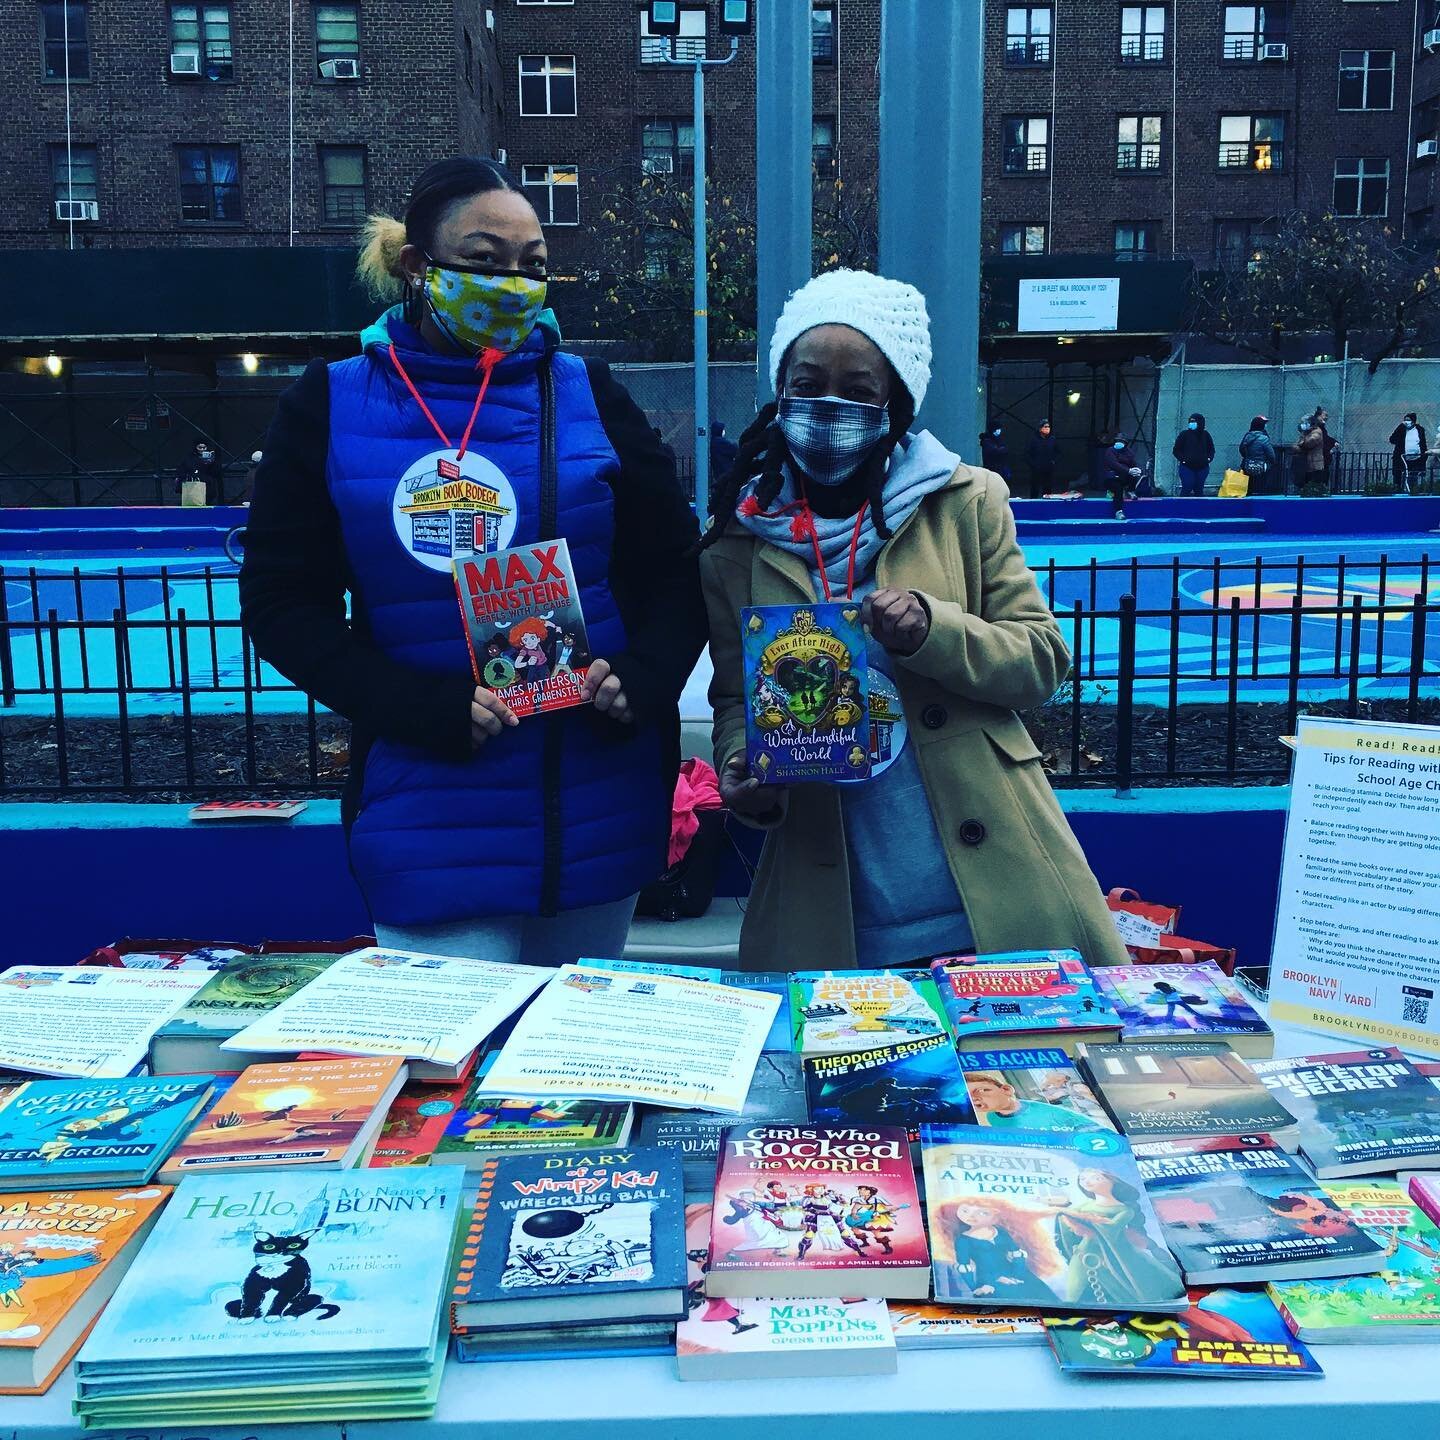 Volunteer with #BrooklynBookBodega ! We will be at Albee Square with @downtownbrooklyn next Saturday for a Women&rsquo;s History Month Celebration. Sign up on our website. Link in bio!